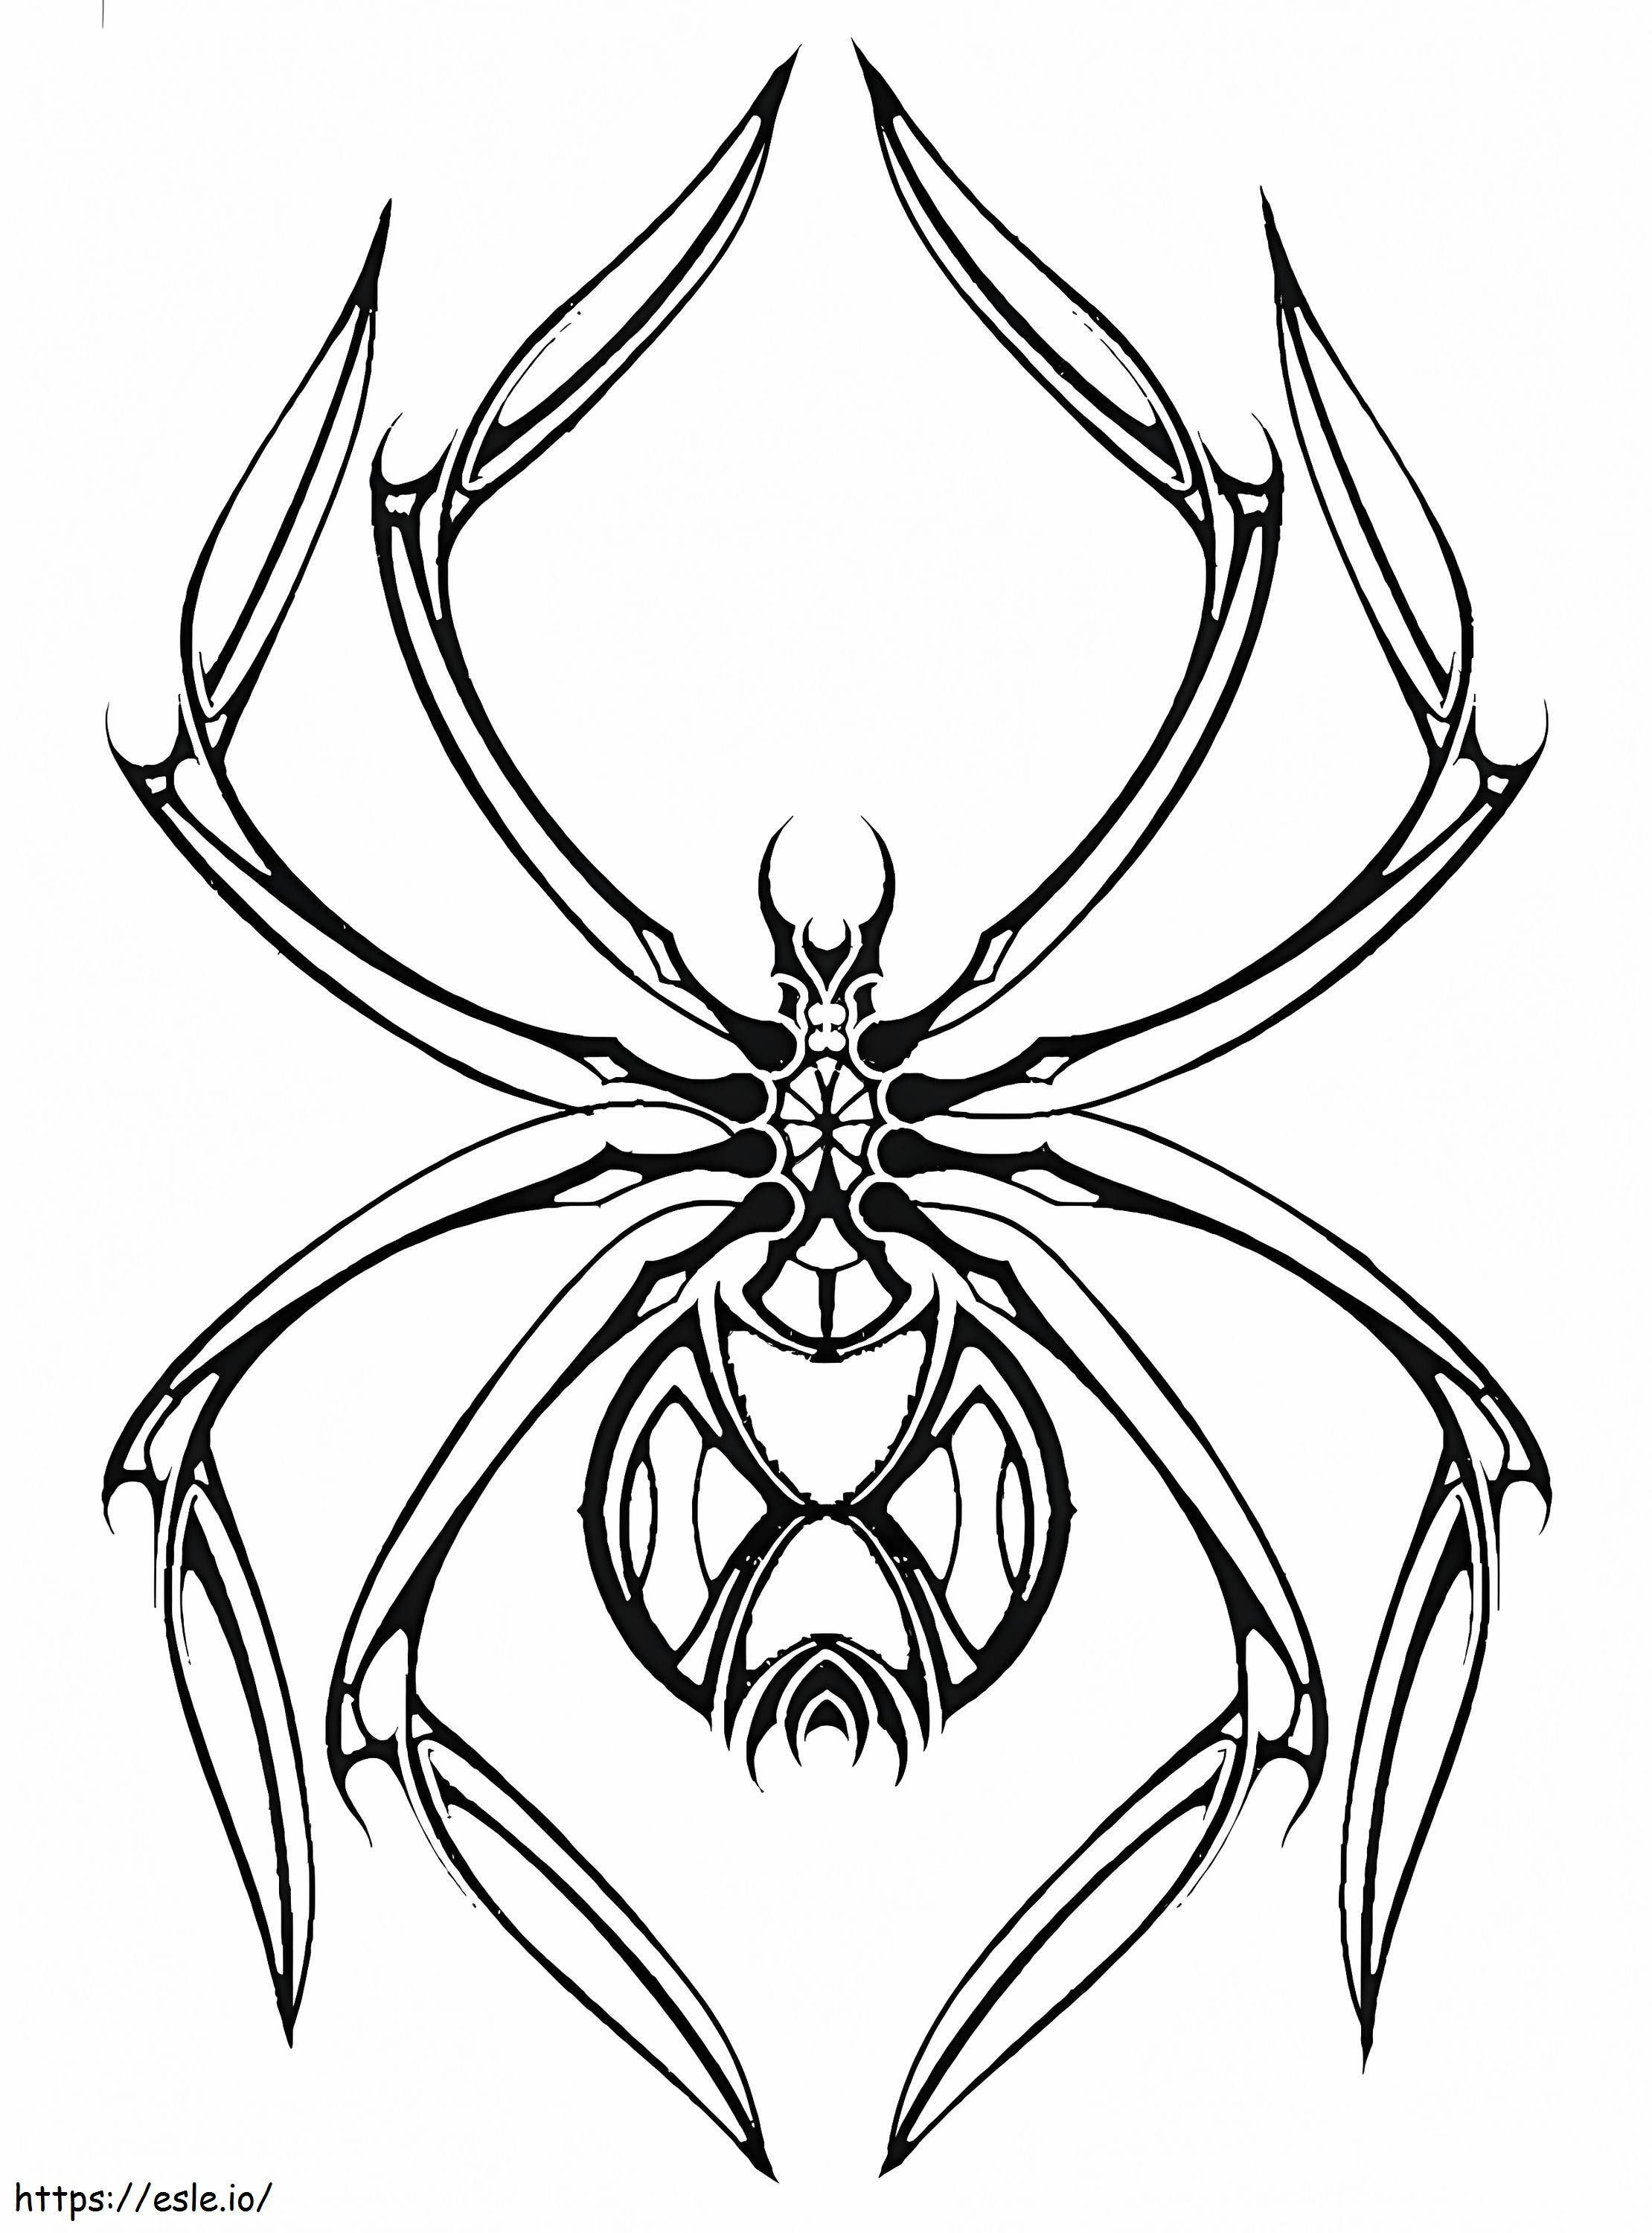 Spider Queen coloring page